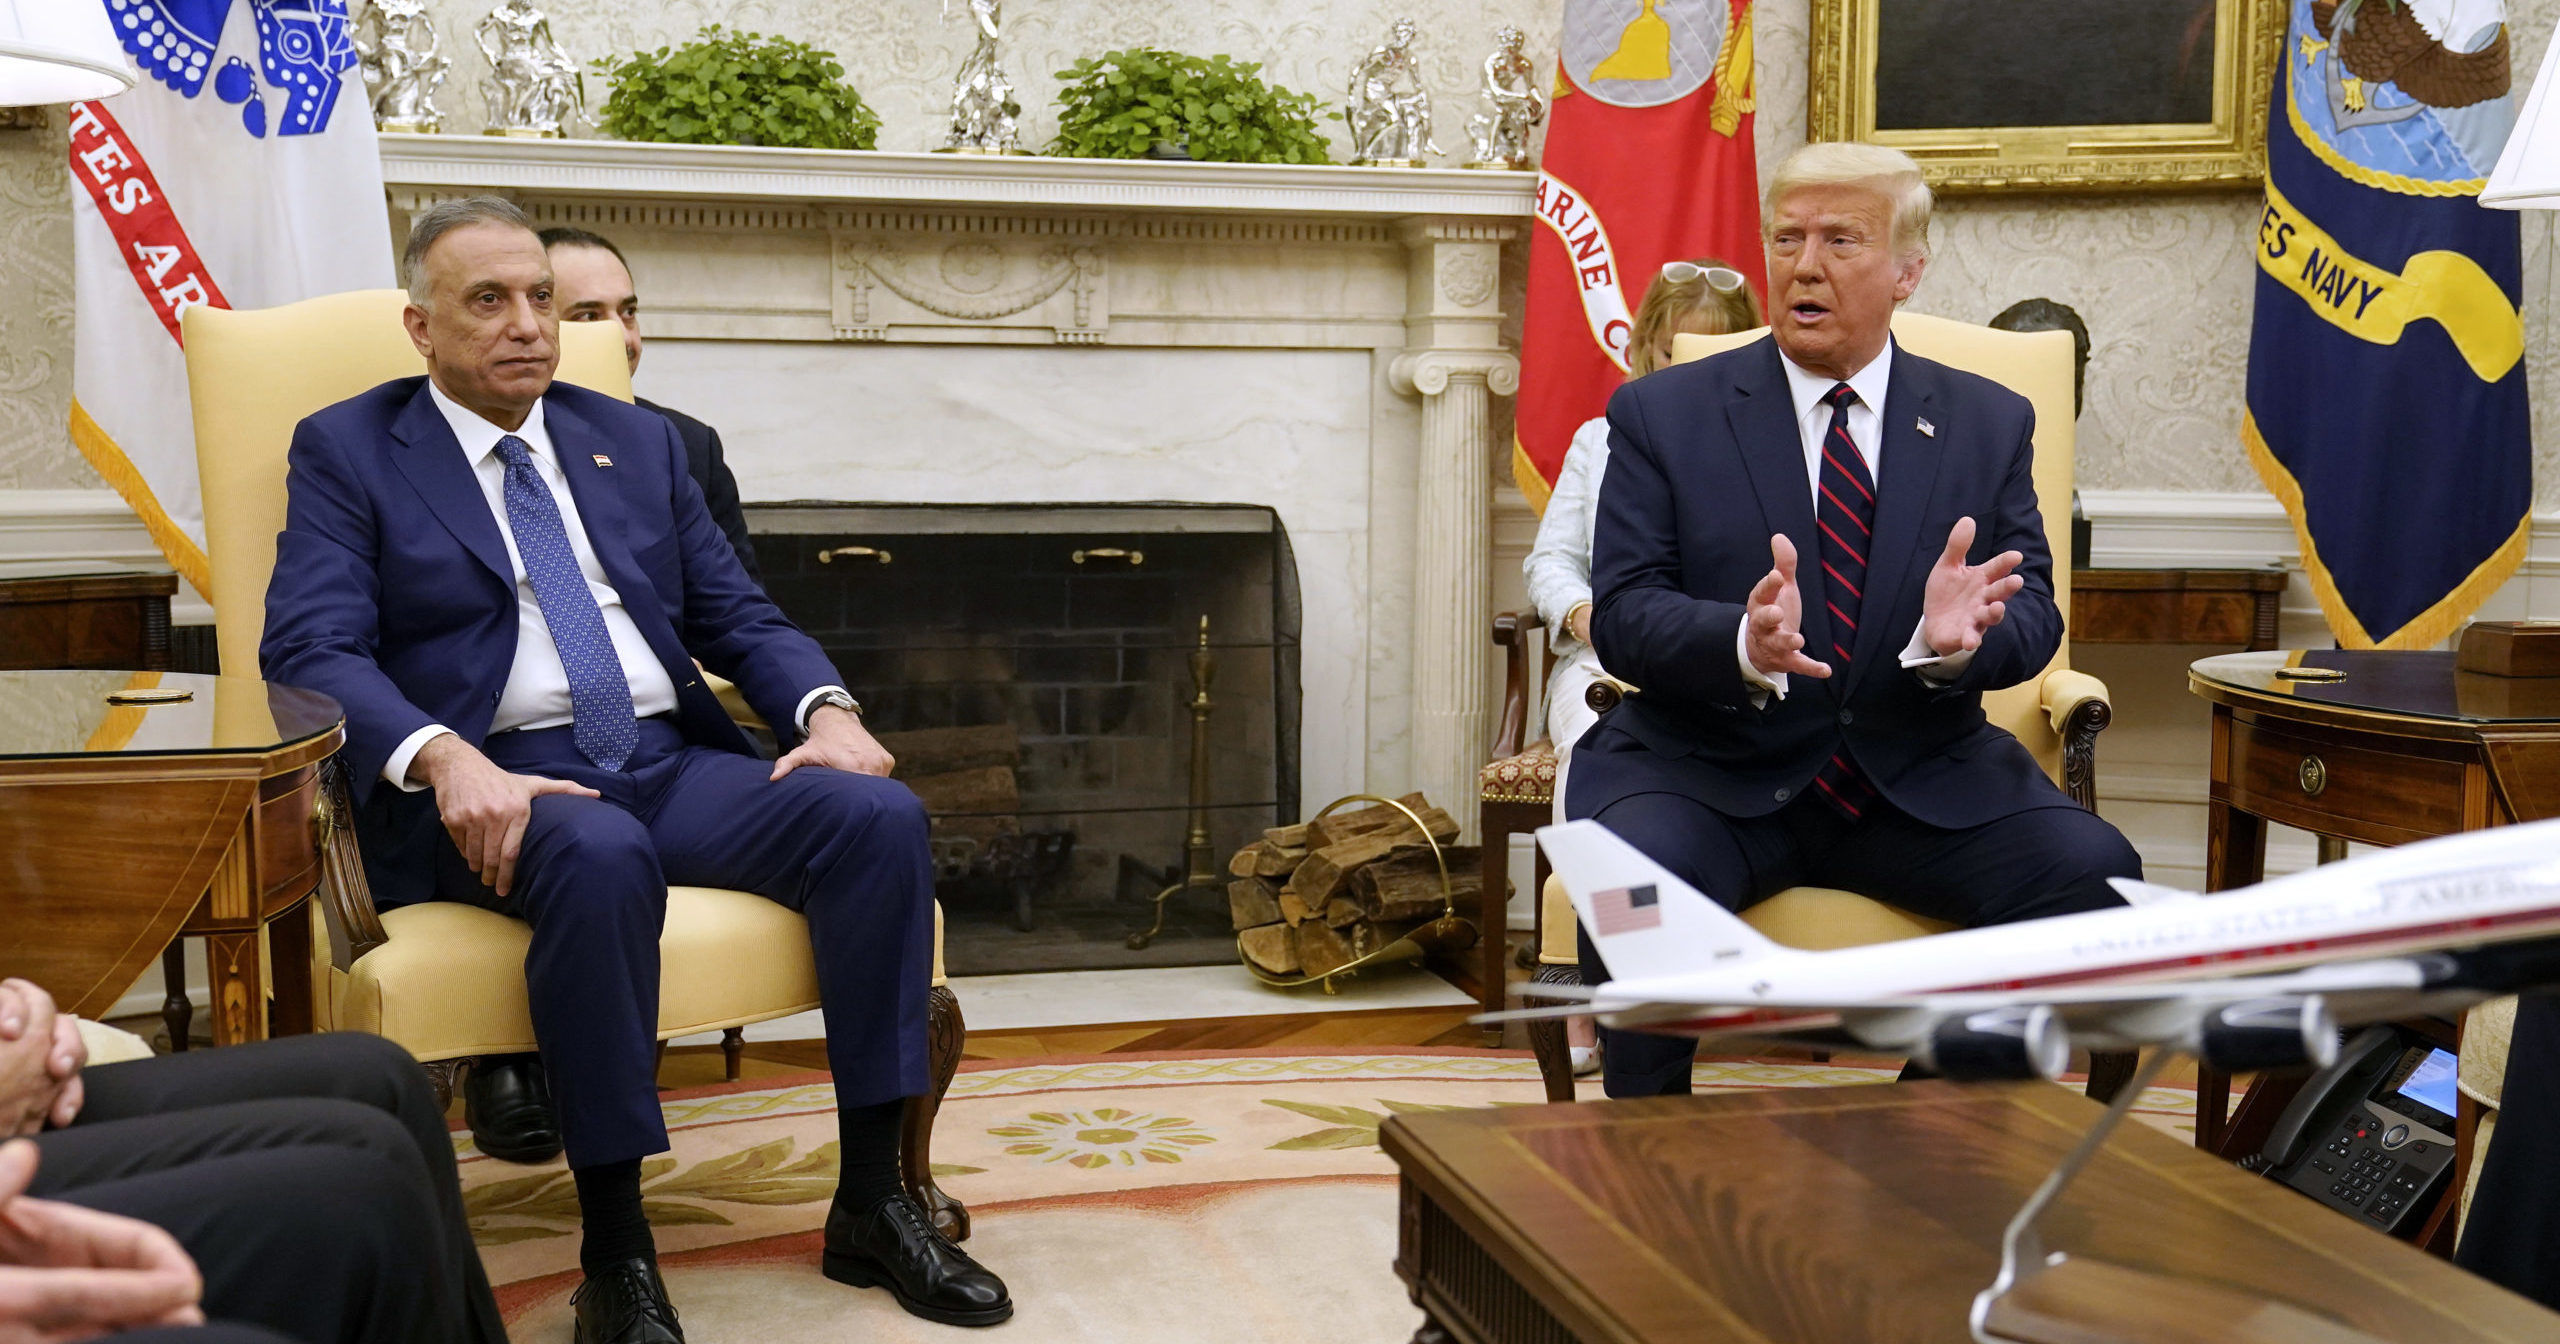 President Donald Trump meets with Iraqi Prime Minister Mustafa al-Kadhimi in the Oval Office of the White House on Aug. 20, 2020, in Washington, D.C.